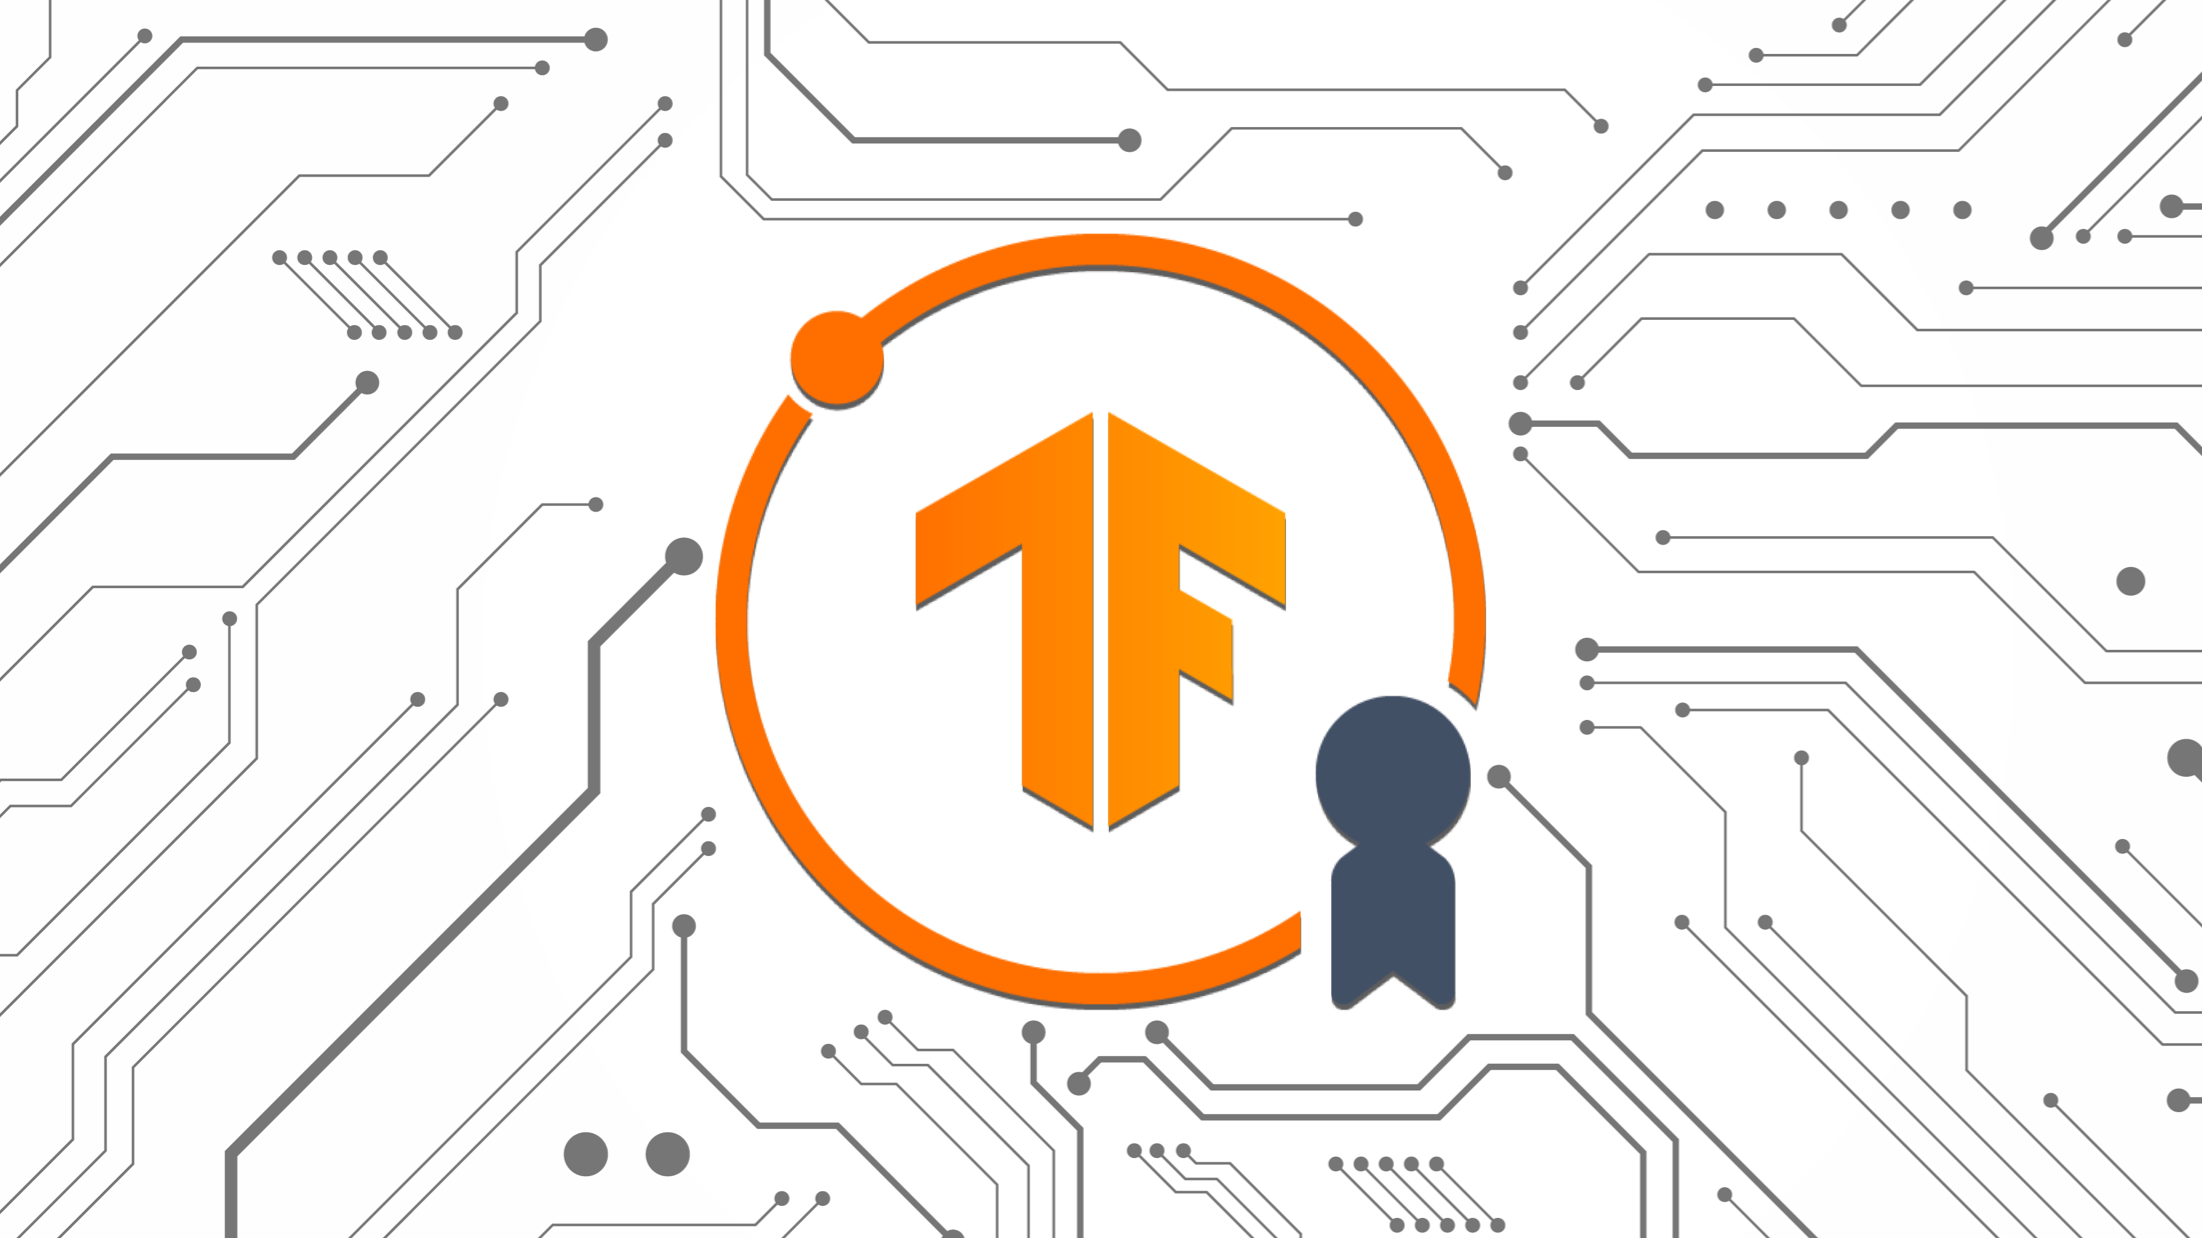 Learn TensorFlow. Pass the TF Developer Certificate Exam. Get Hired